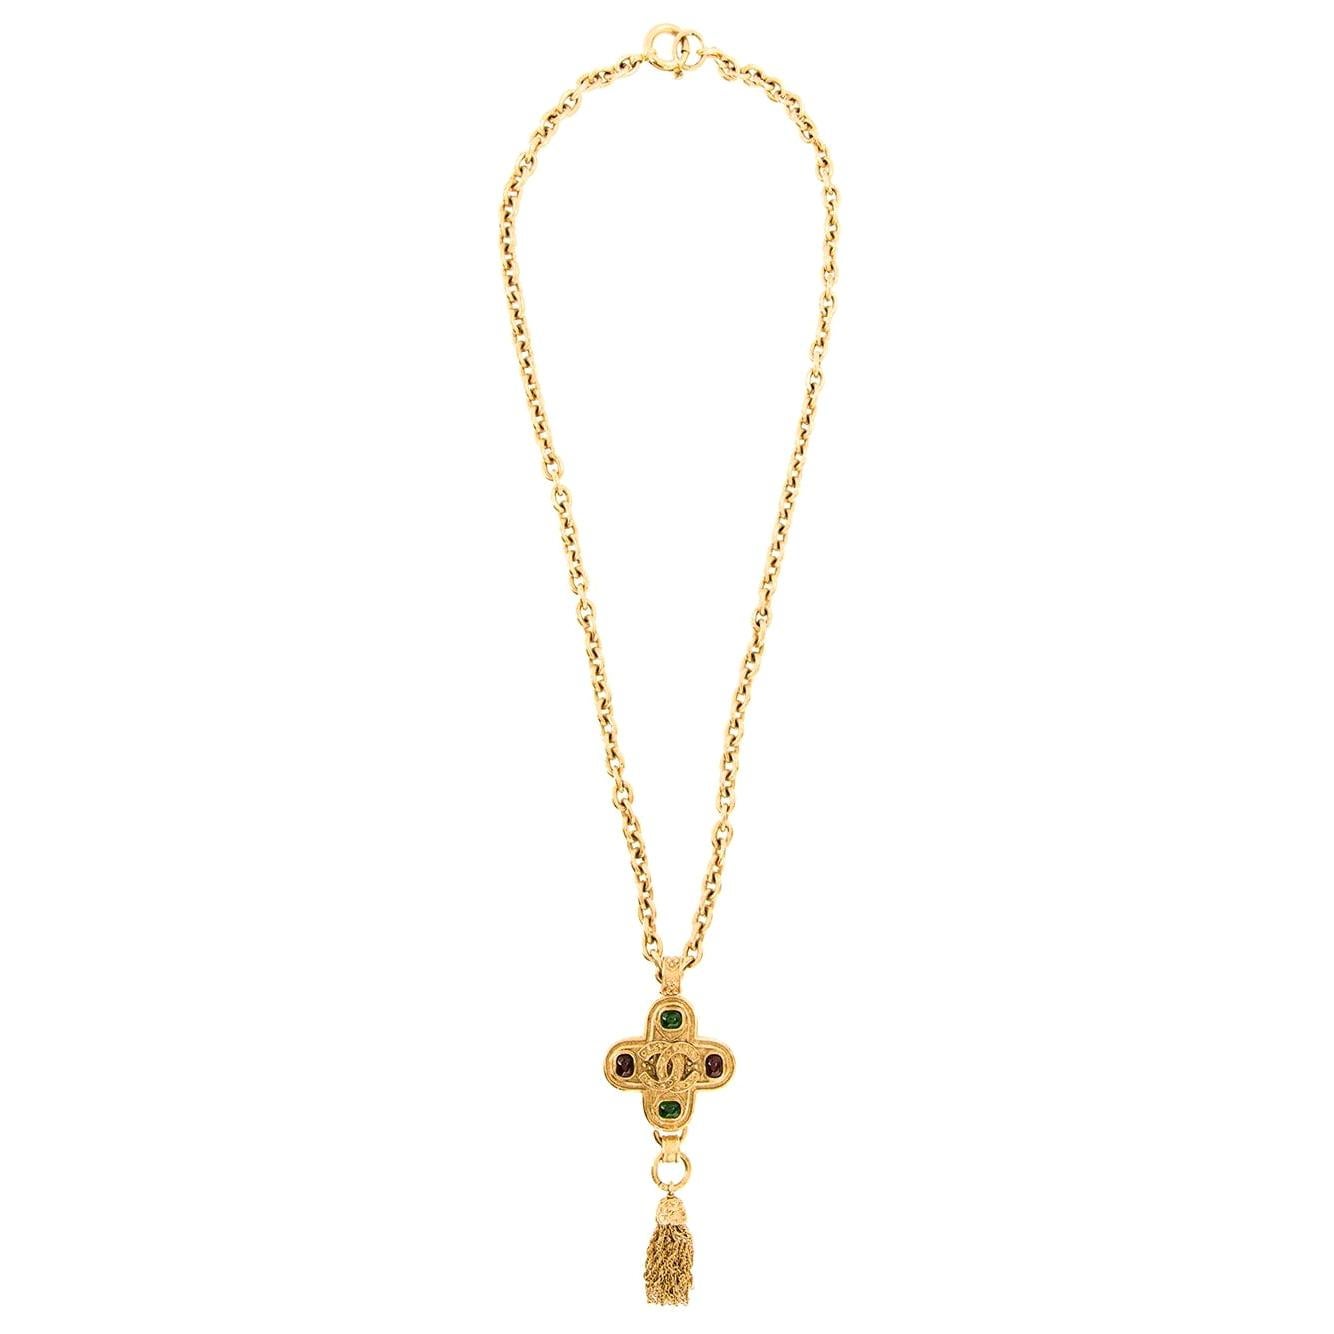 Chanel Gripoix Gold Charm Logo Cross Evening Drop Link Chain Necklace in Box